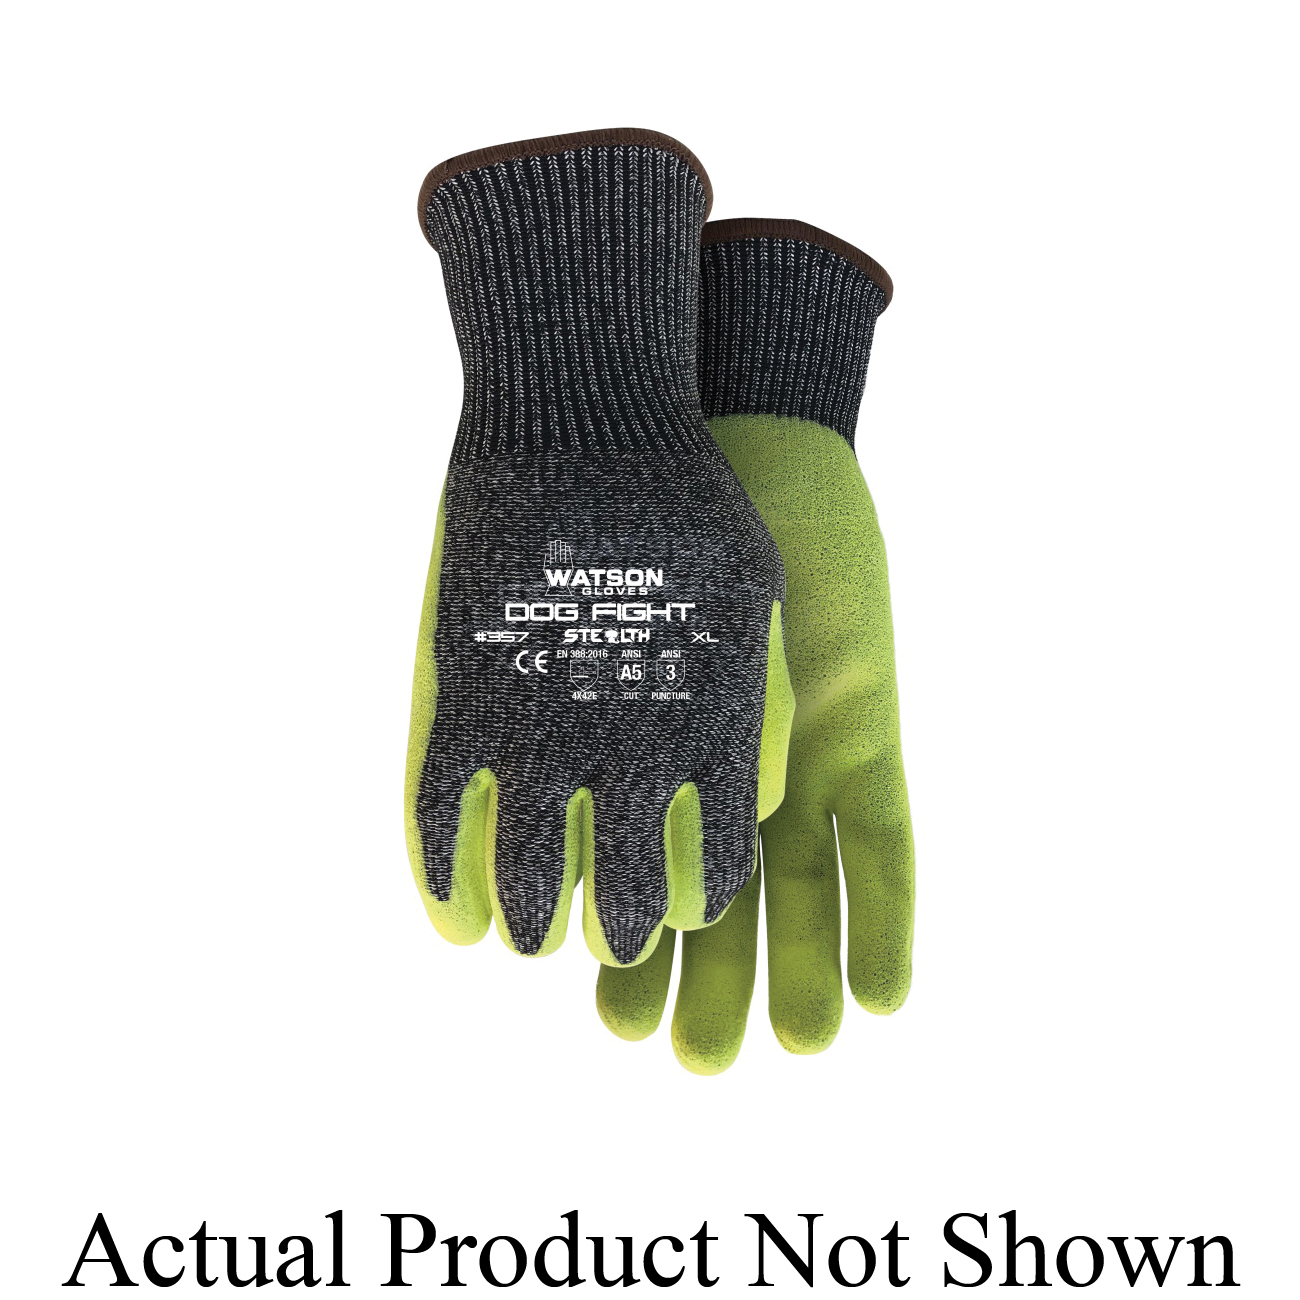 Stealth 357-S Dog Fight General Purpose Gloves, Coated, Open Back/Straight Thumb/Seamless Style, S, HPPE Shell Palm, Dyneema®/HPPE, Gray/Hi-Viz Yellow, Knit Wrist Cuff, Nitrile Coating, Resists: Abrasion, Blade Cut, Puncture and Tear